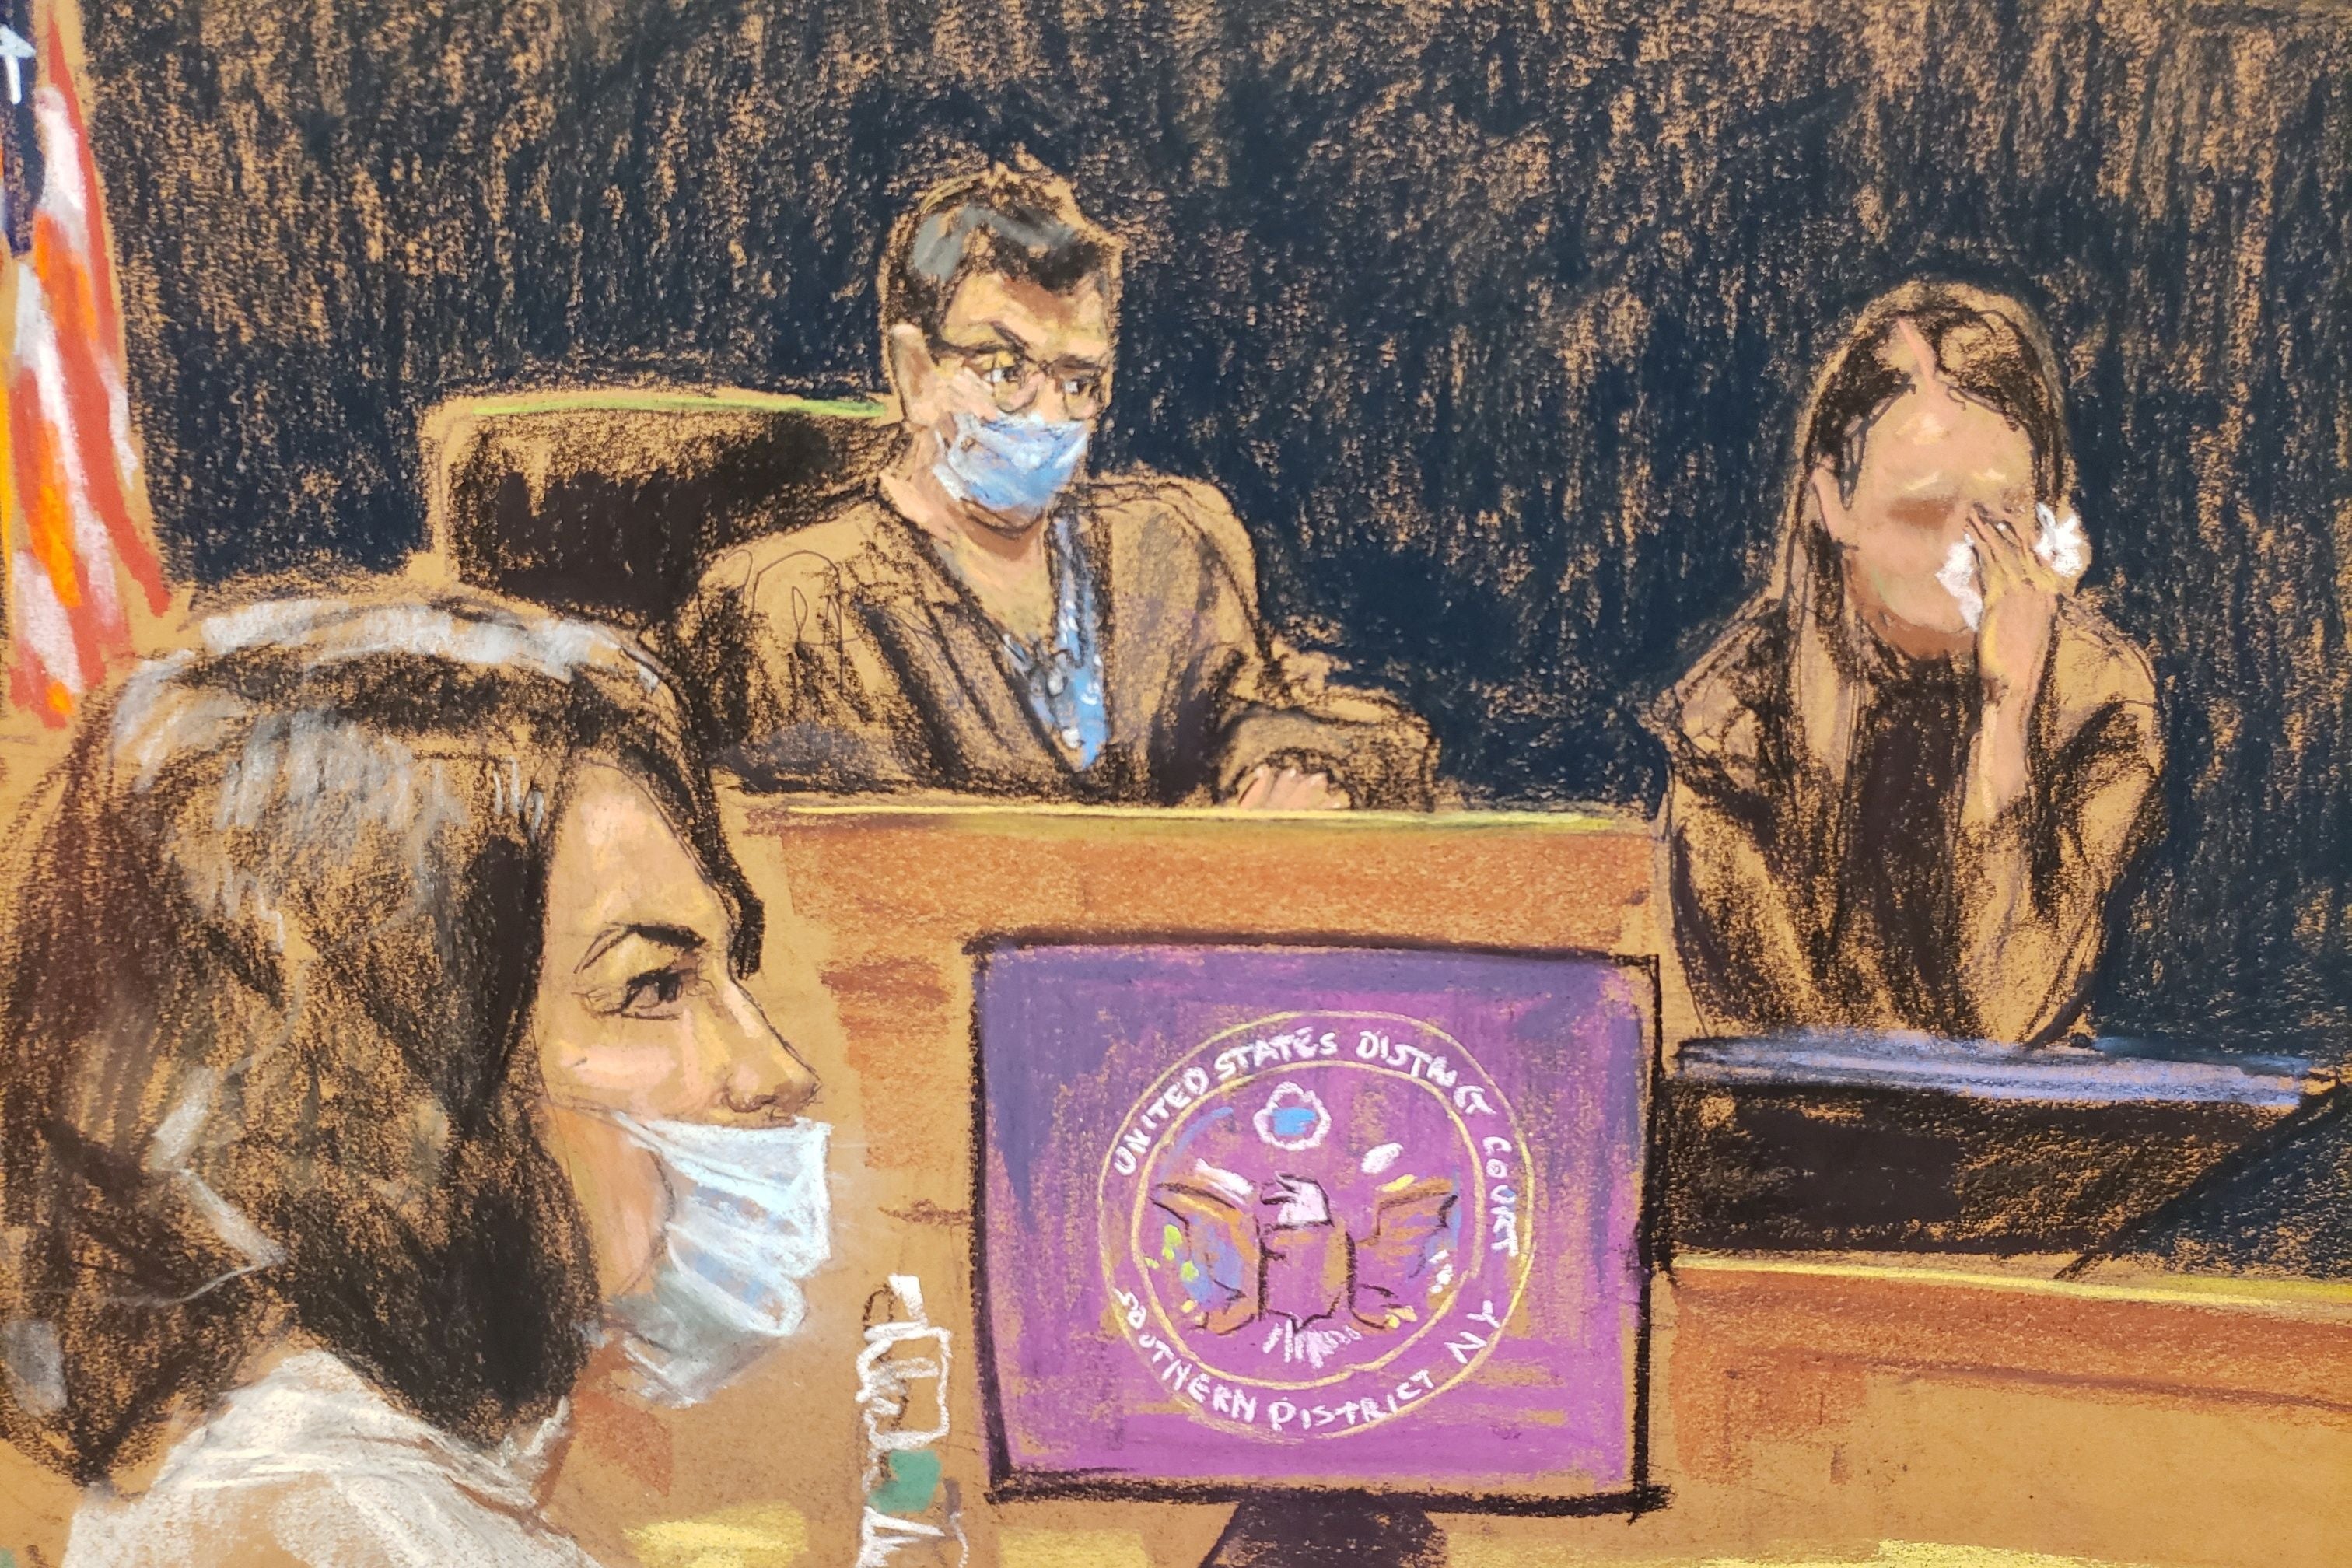 A courtroom illustration of witness "Jane" testifying, holding a tissue over her eyes, crying, with the judge in the background as Ghislaine Maxwell looks on